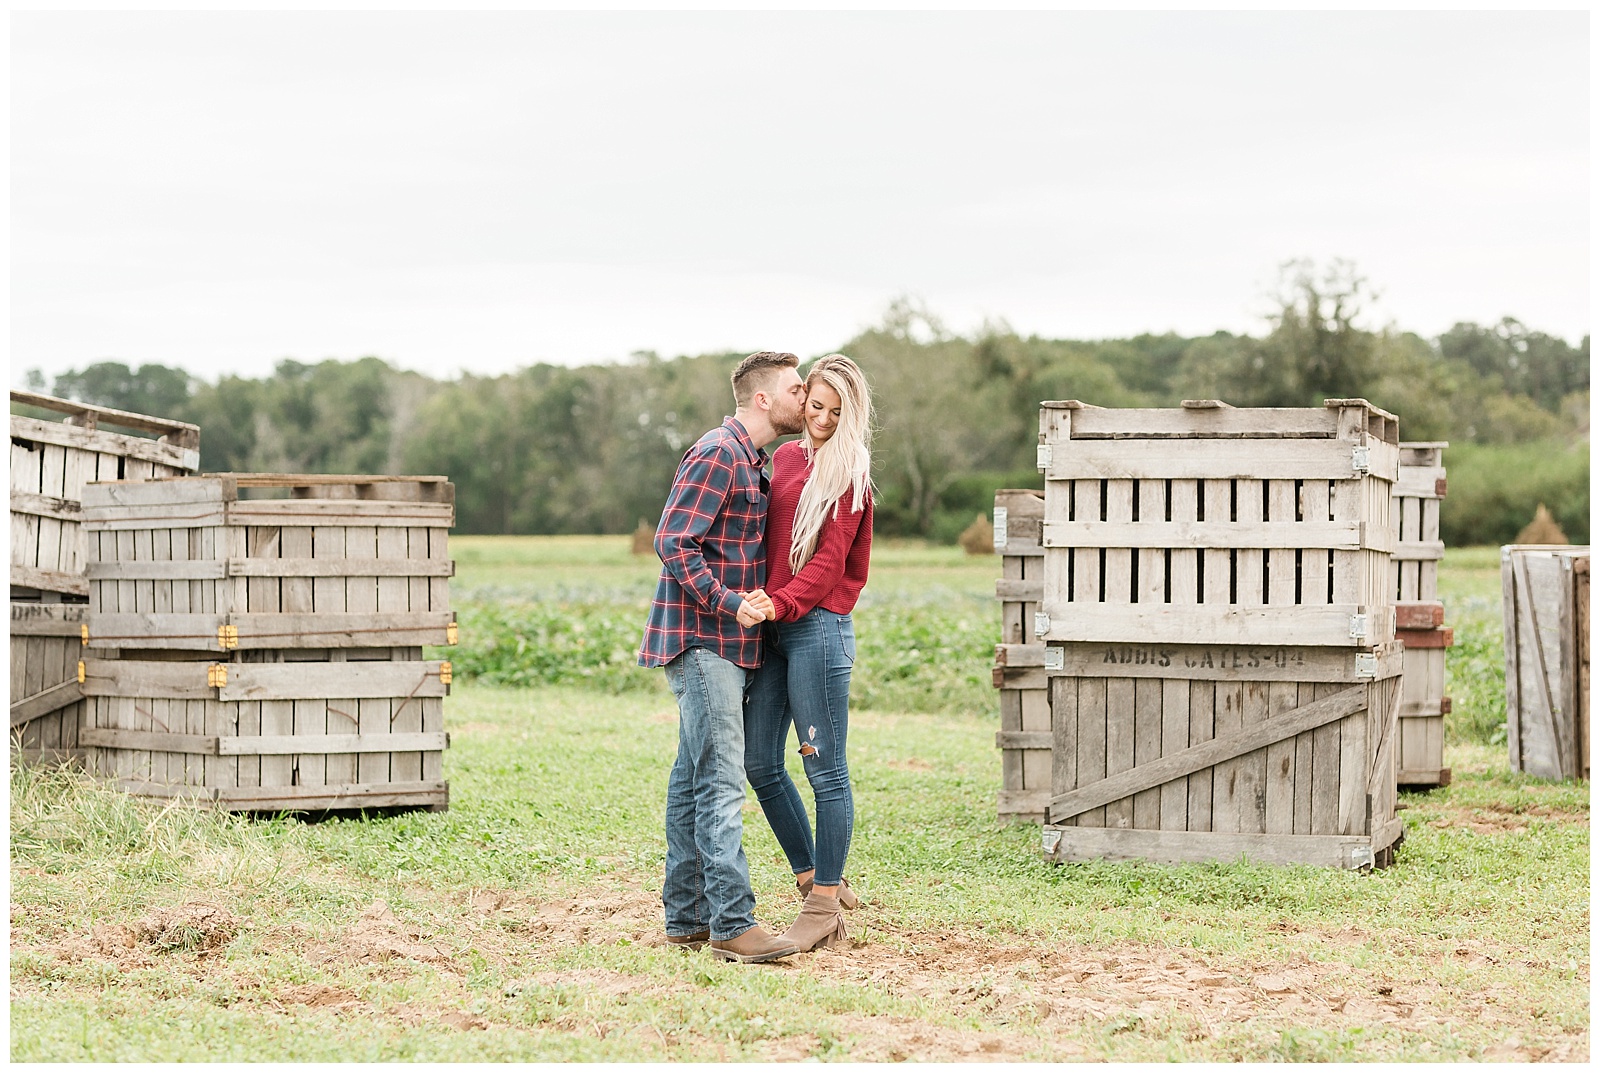 cullipher-farms-engagement-session-59.jpg